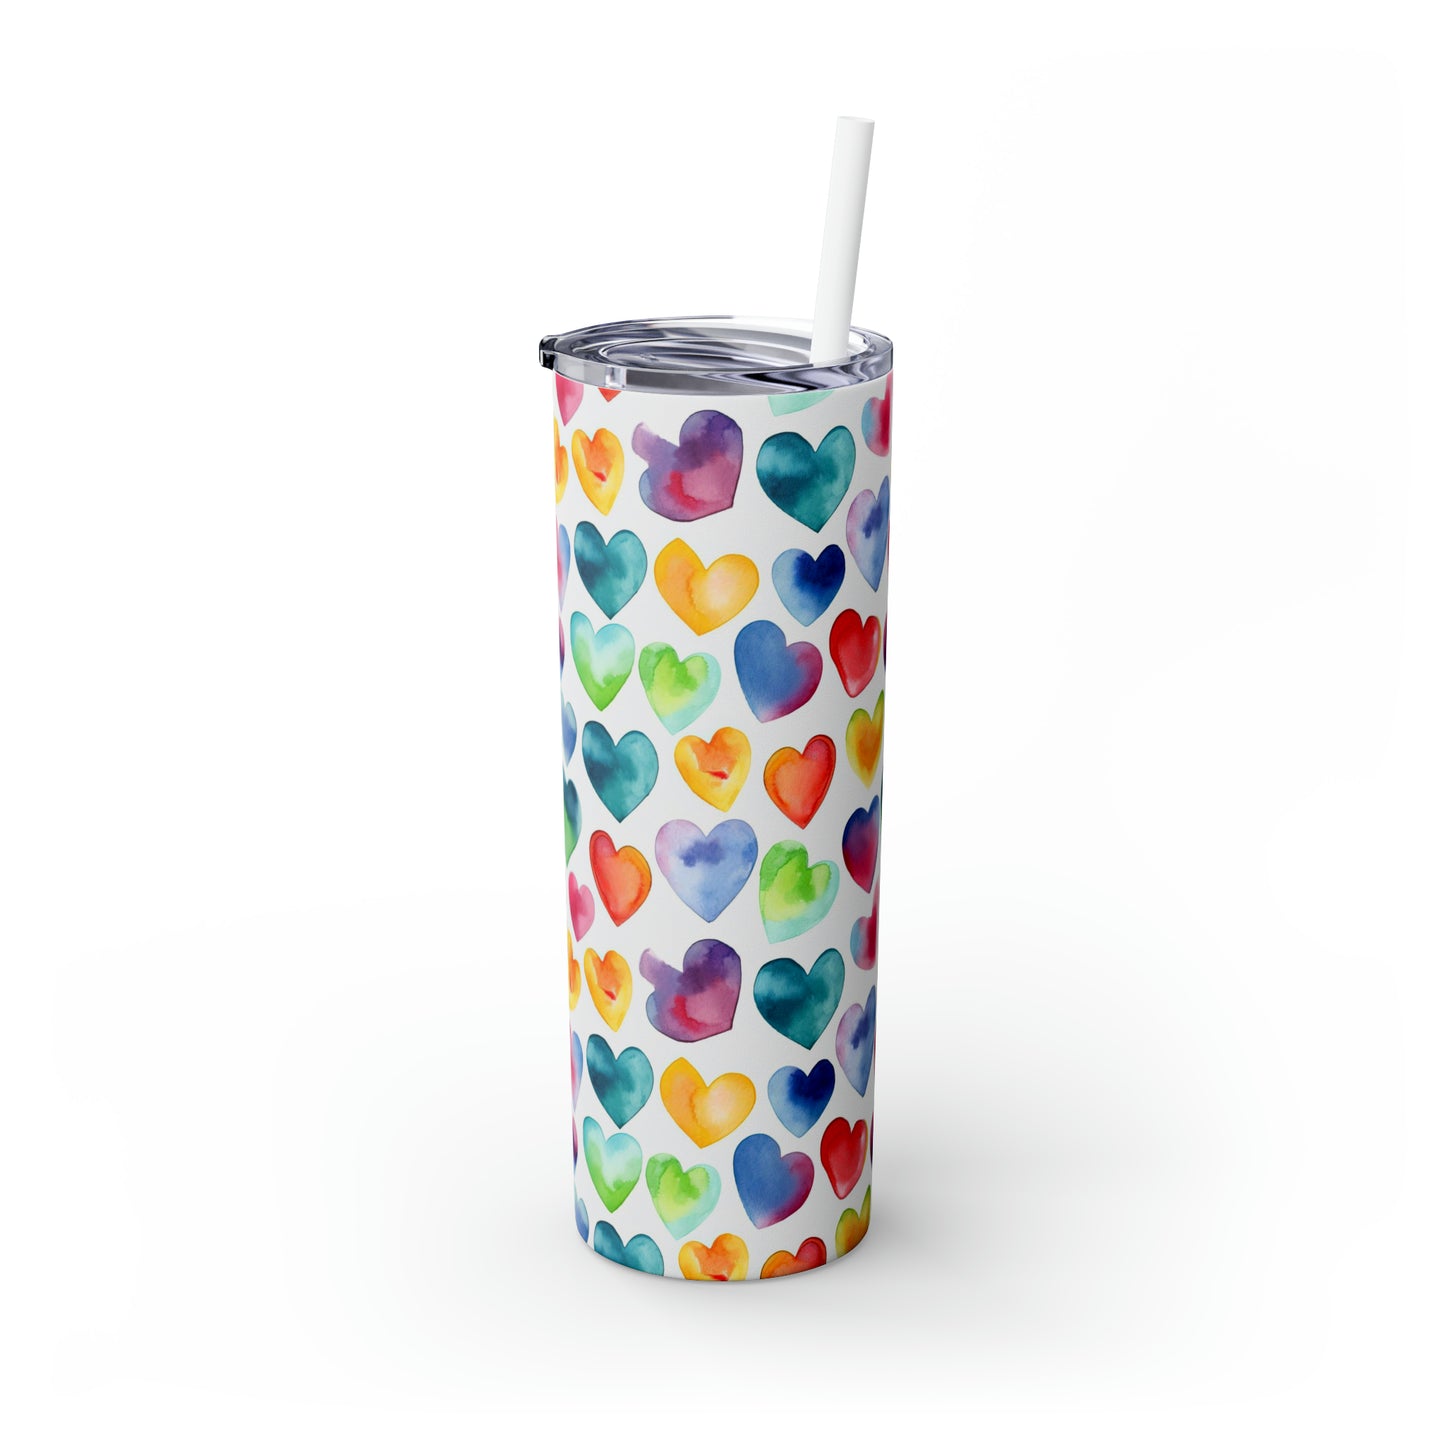 Watercolor Hearts - Rainbow - Multi - Skinny Tumbler with Straw, 20oz - Stainless Steel